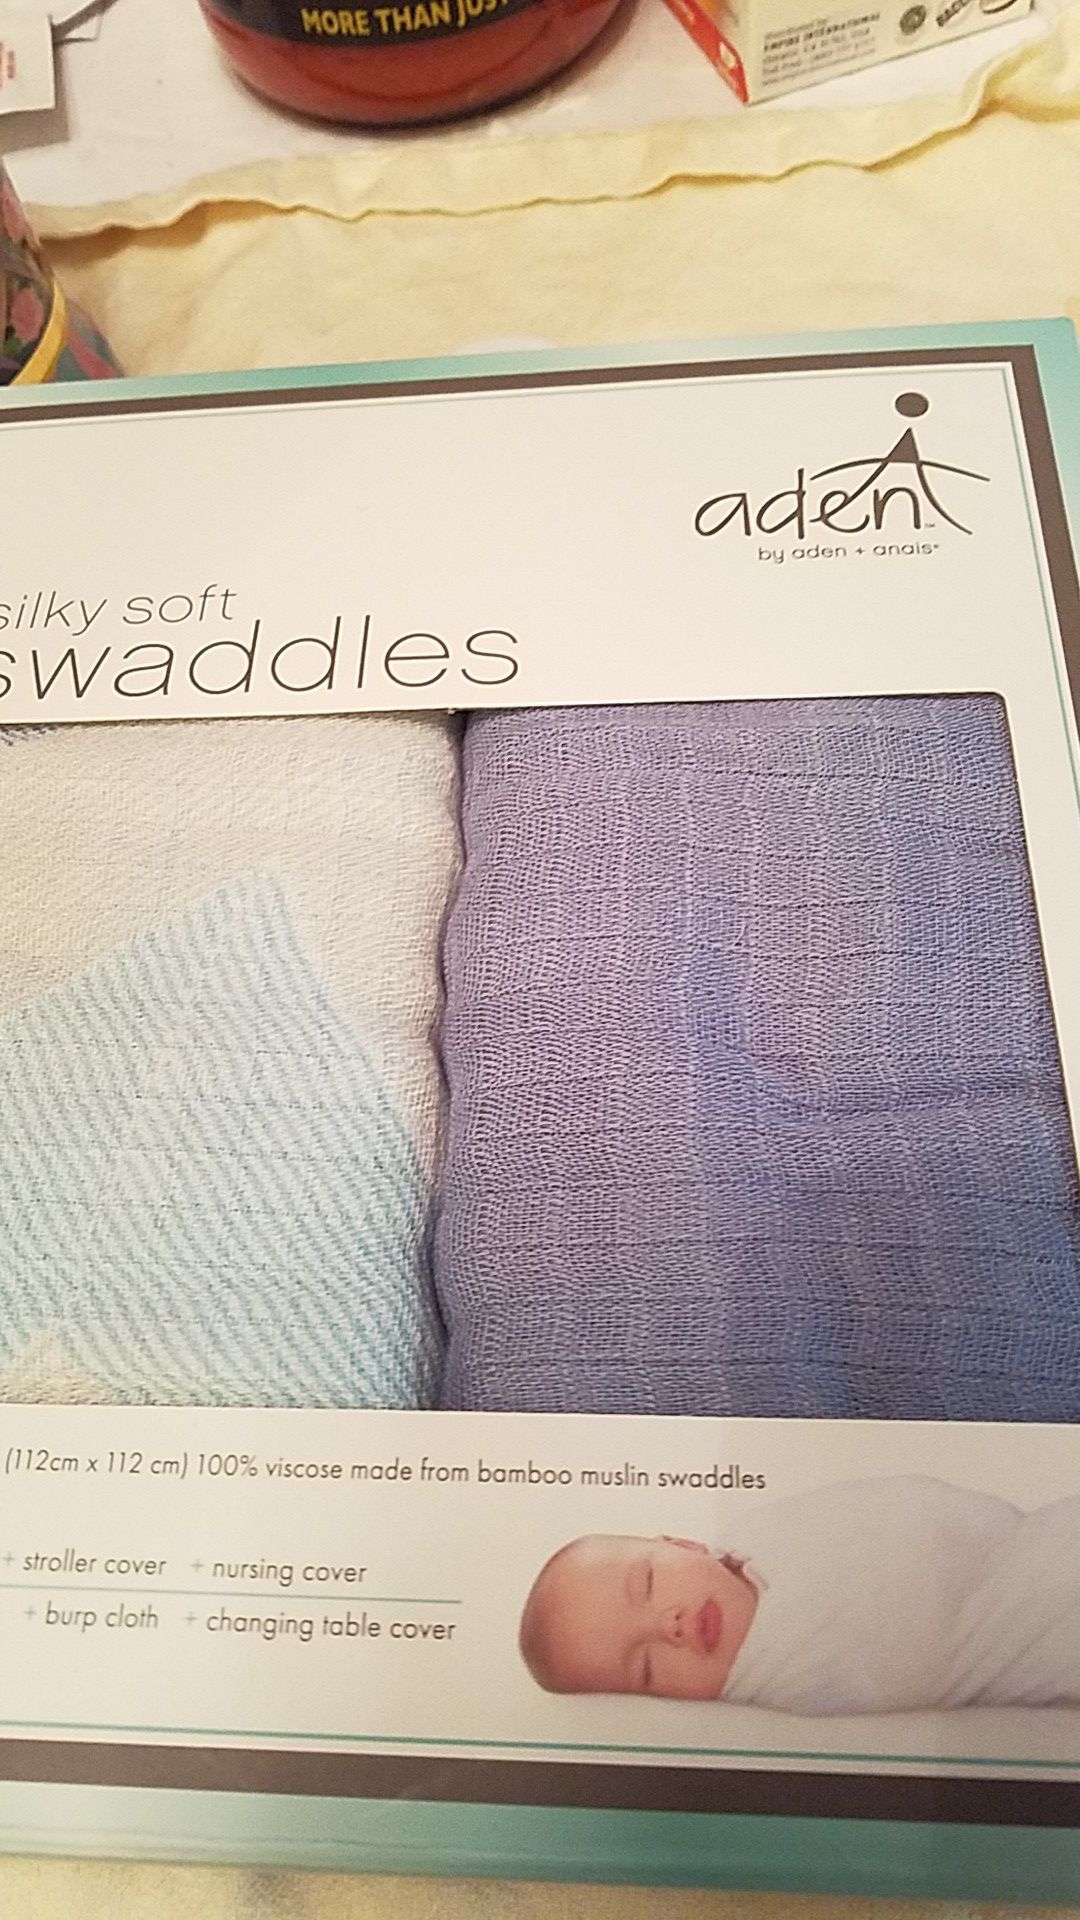 Silky soft swaddles